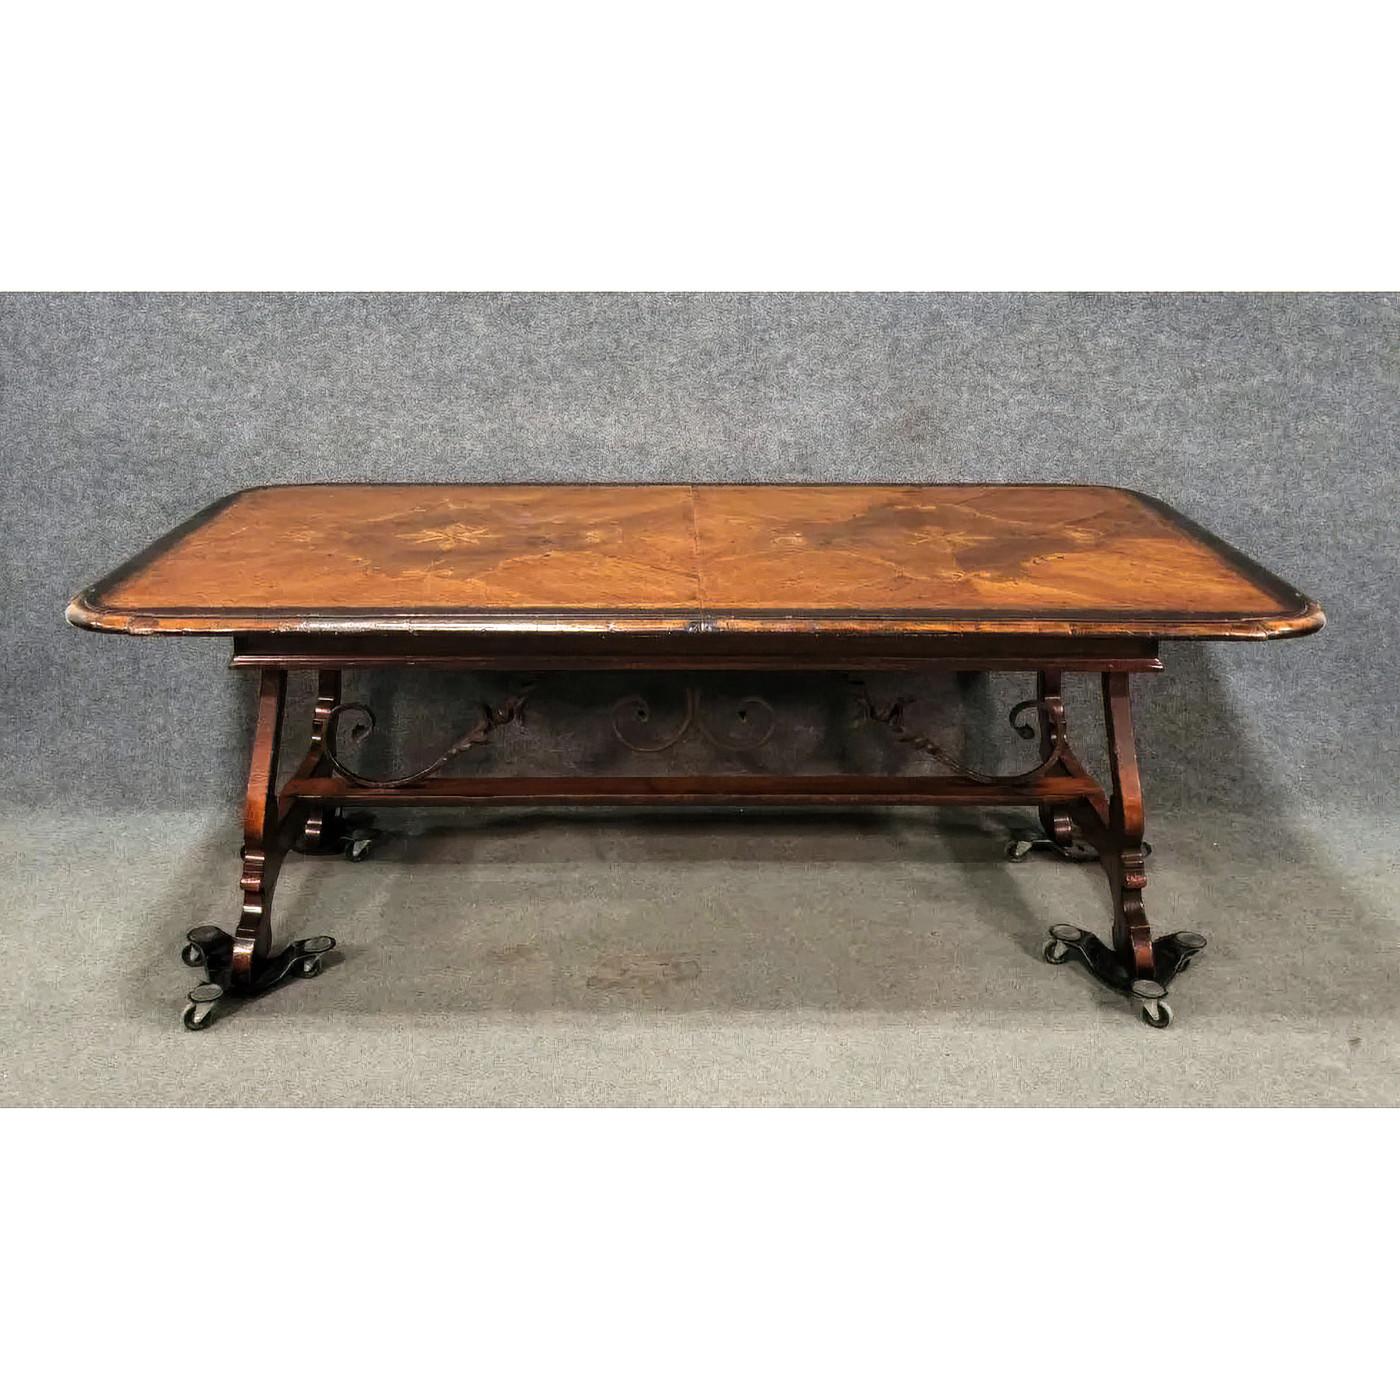 Italian parquetry walnut extension dining table with an inlaid parquetry pattern top, with molded edges and a hand-rubbed antiqued patina above trestle end supports with hand forged iron scrollwork and a stretcher. 20th century.

Dimensions: